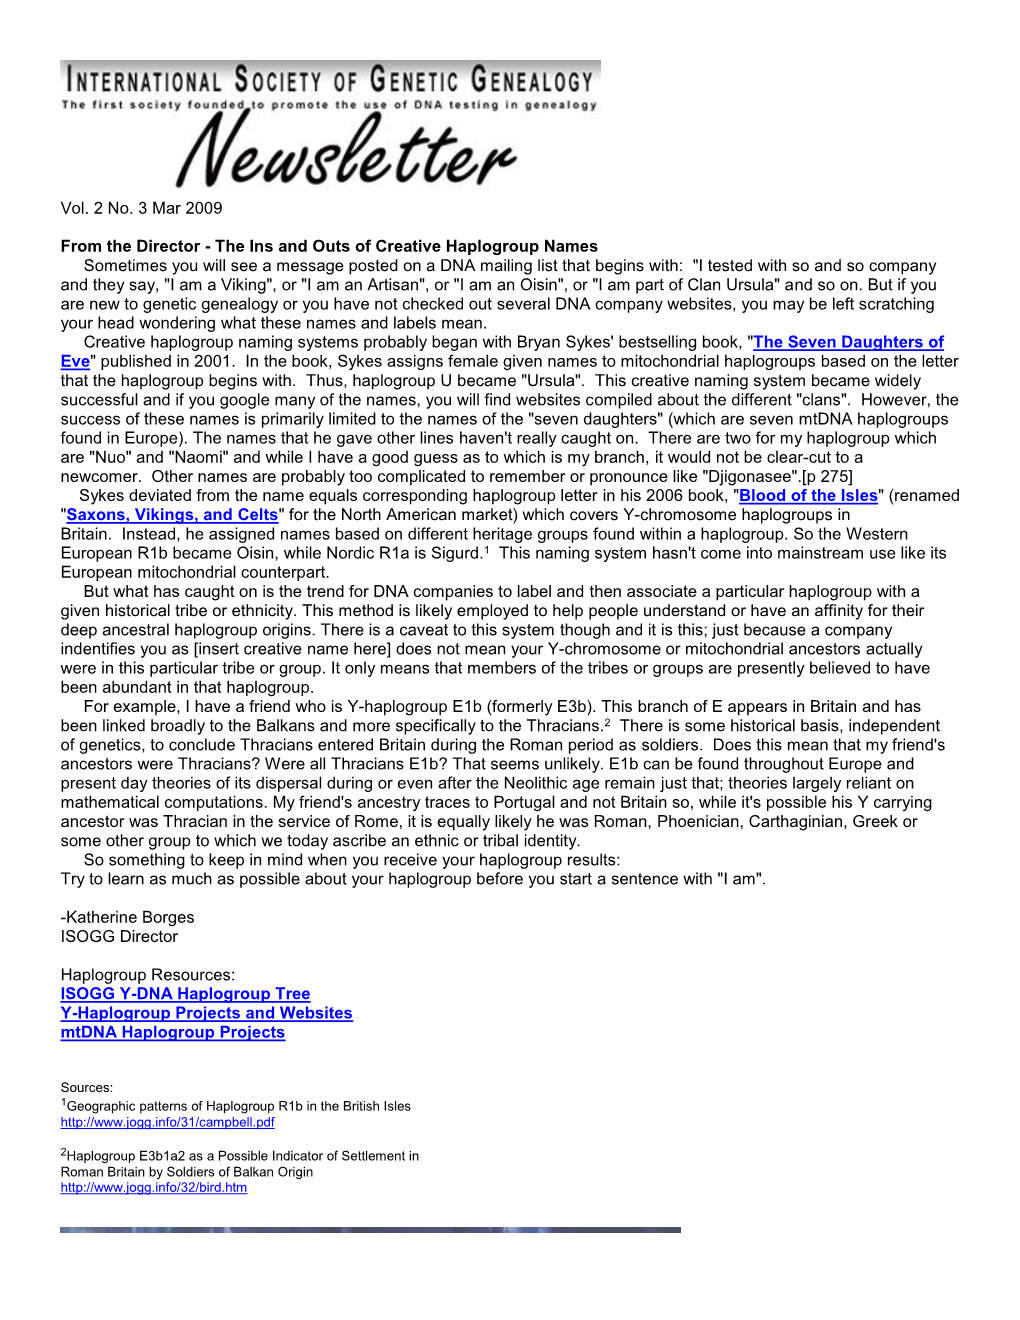 ISOGG Newsletter March 2009